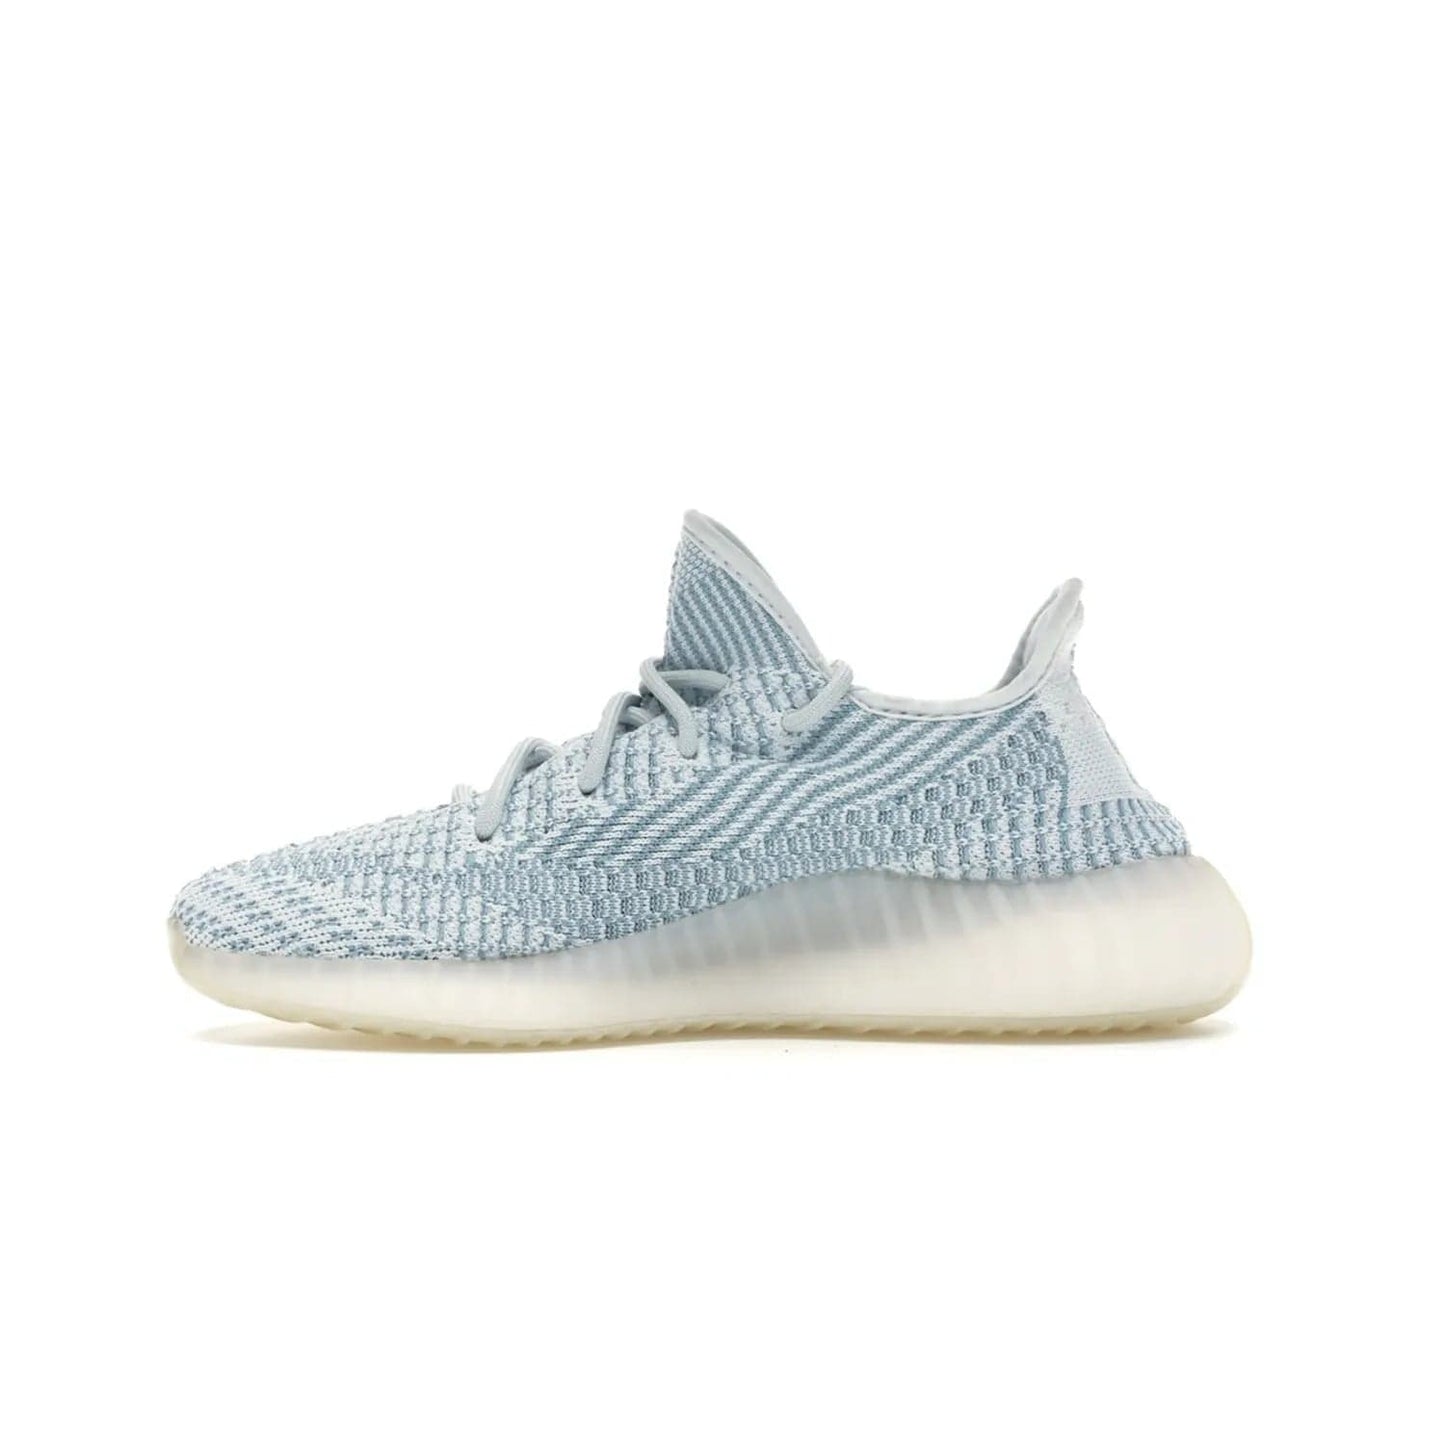 adidas Yeezy Boost 350 V2 Cloud White (Non-Reflective) - Image 19 - Only at www.BallersClubKickz.com - Uniquely designed adidas Yeezy Boost 350 V2 Cloud White (Non-Reflective) with a Primeknit upper in shades of cream and blue with a contrasting hard sole. A fashion-forward sneaker with a transparent strip and blue-and-white patterns.